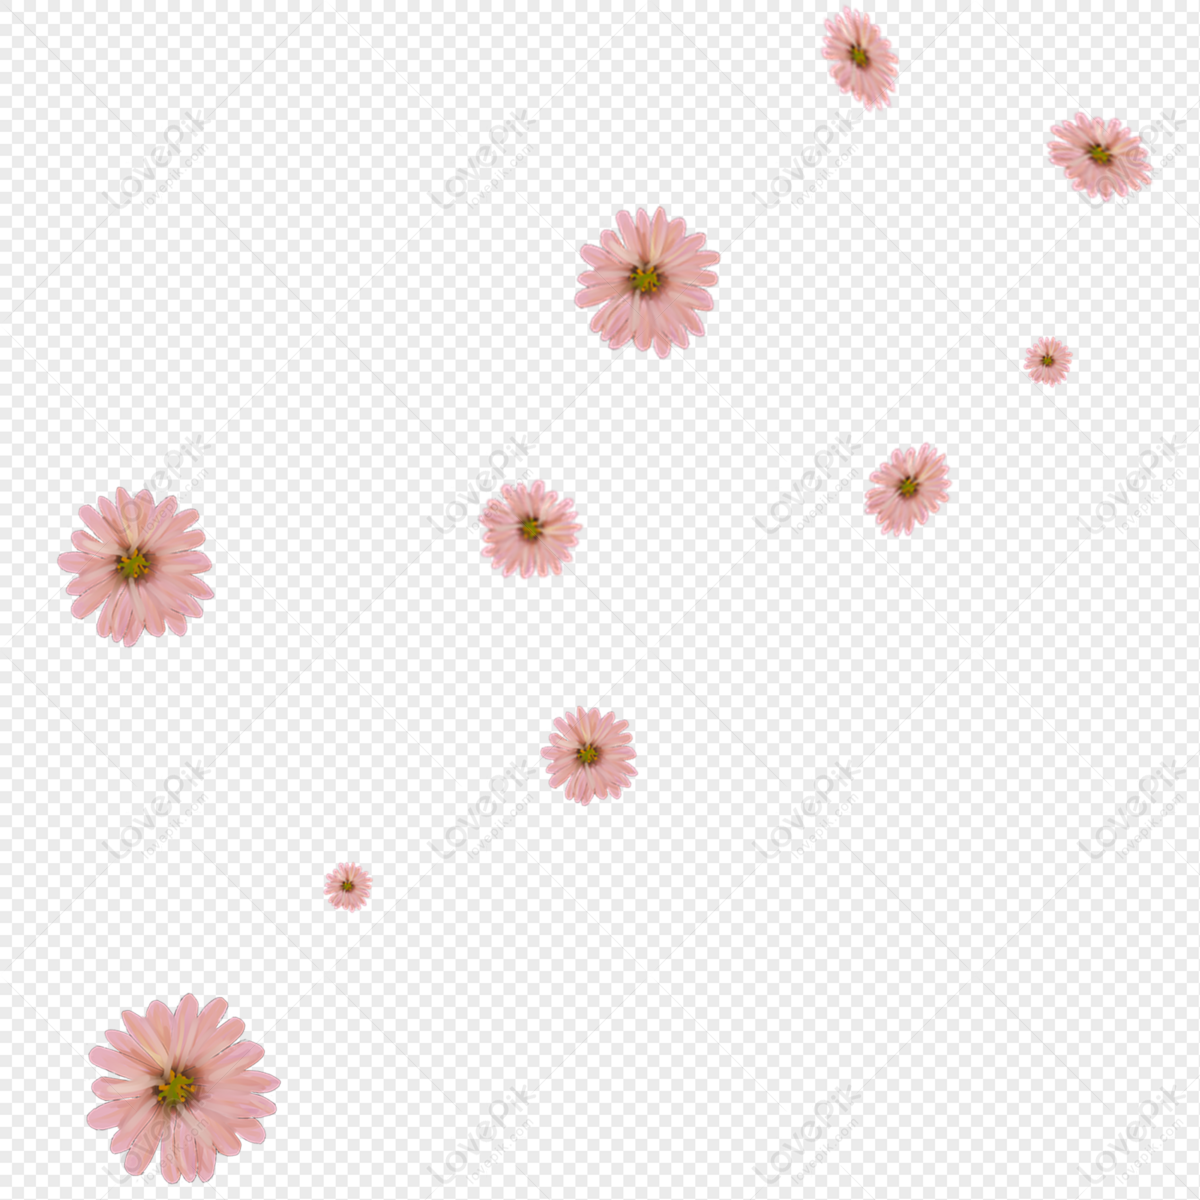 Falling Flowers PNG Transparent Background And Clipart Image For Free  Download - Lovepik | 401494690